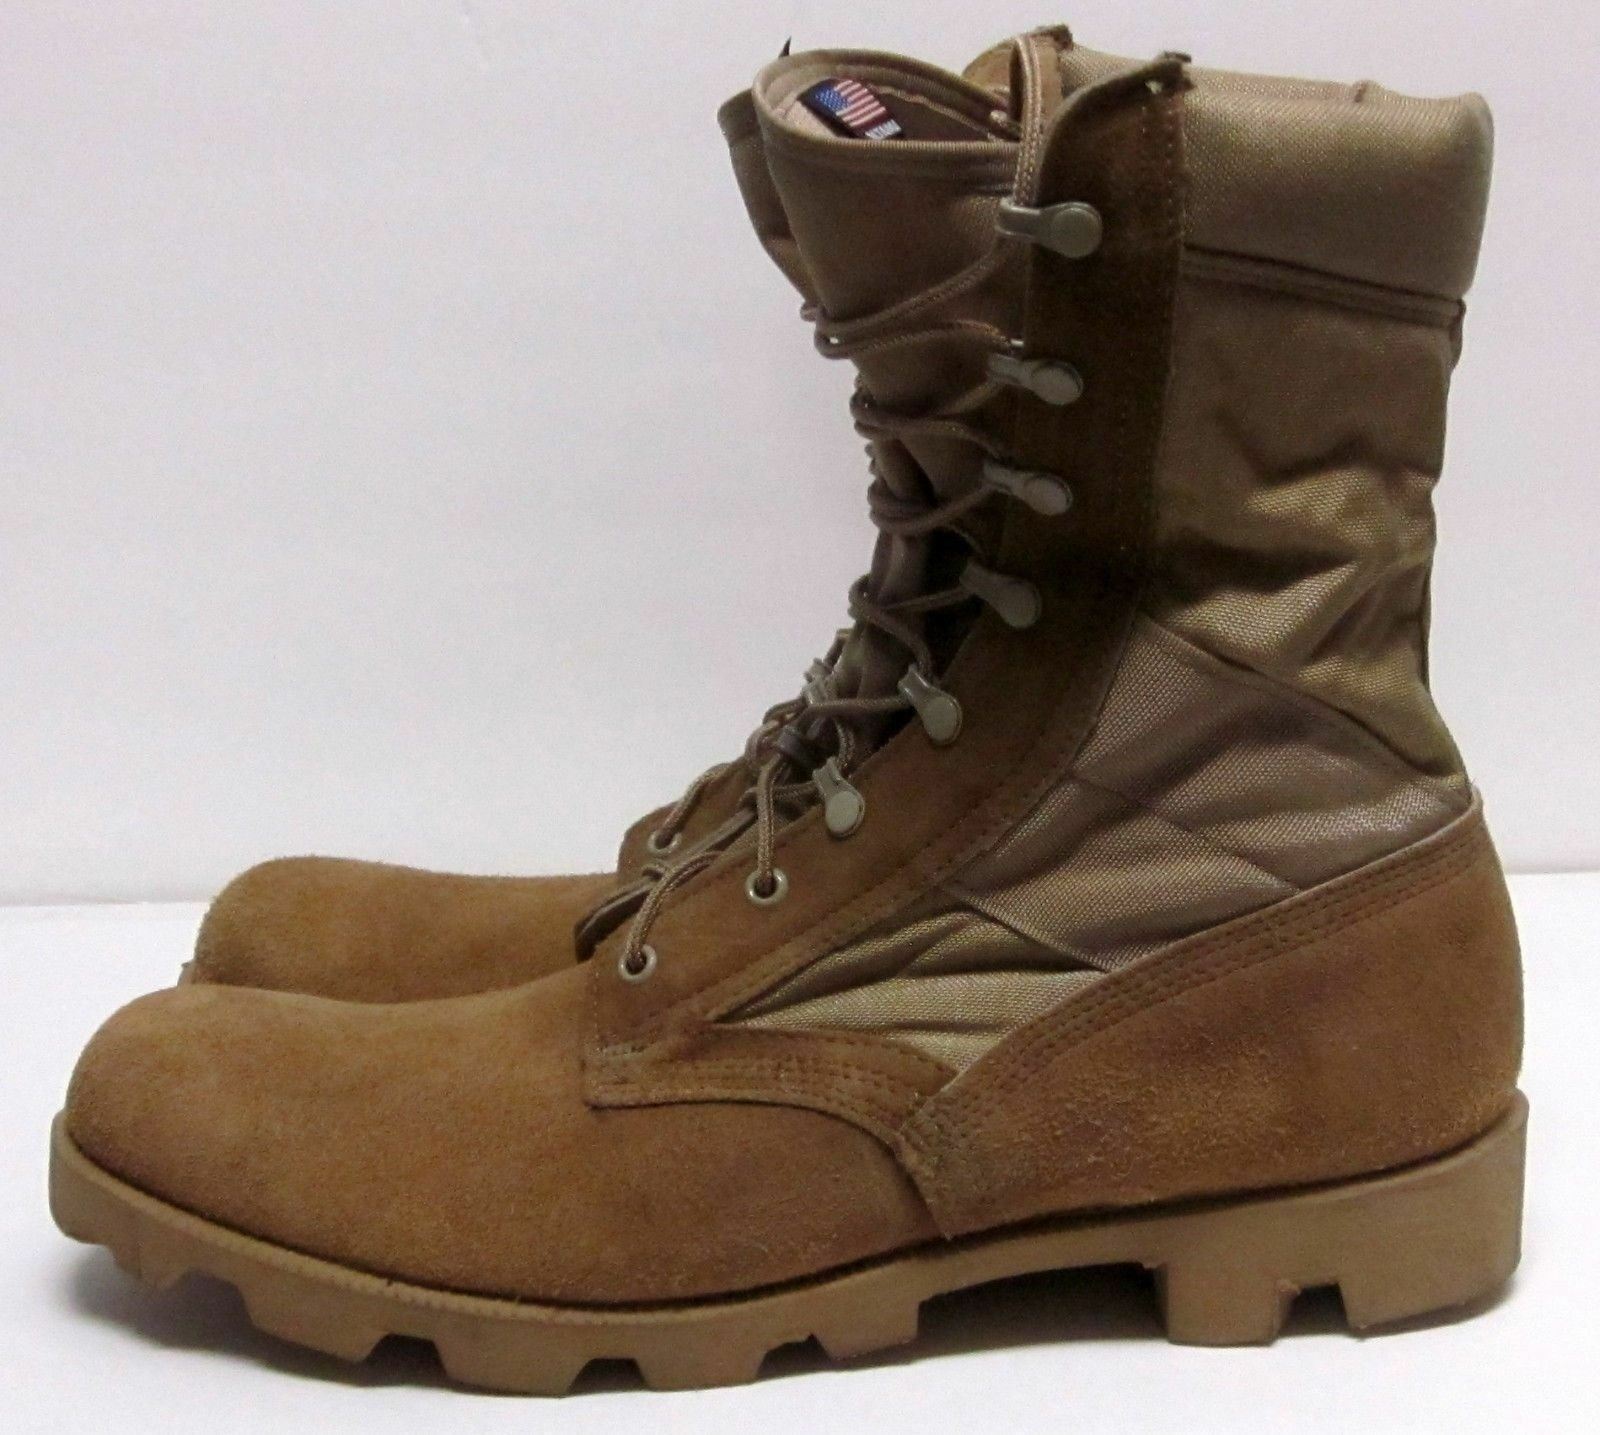 NWOB ALTAMA 5300 RO-SEARCH (14 XN) HOT WEATHER DESERT Military Boots ...